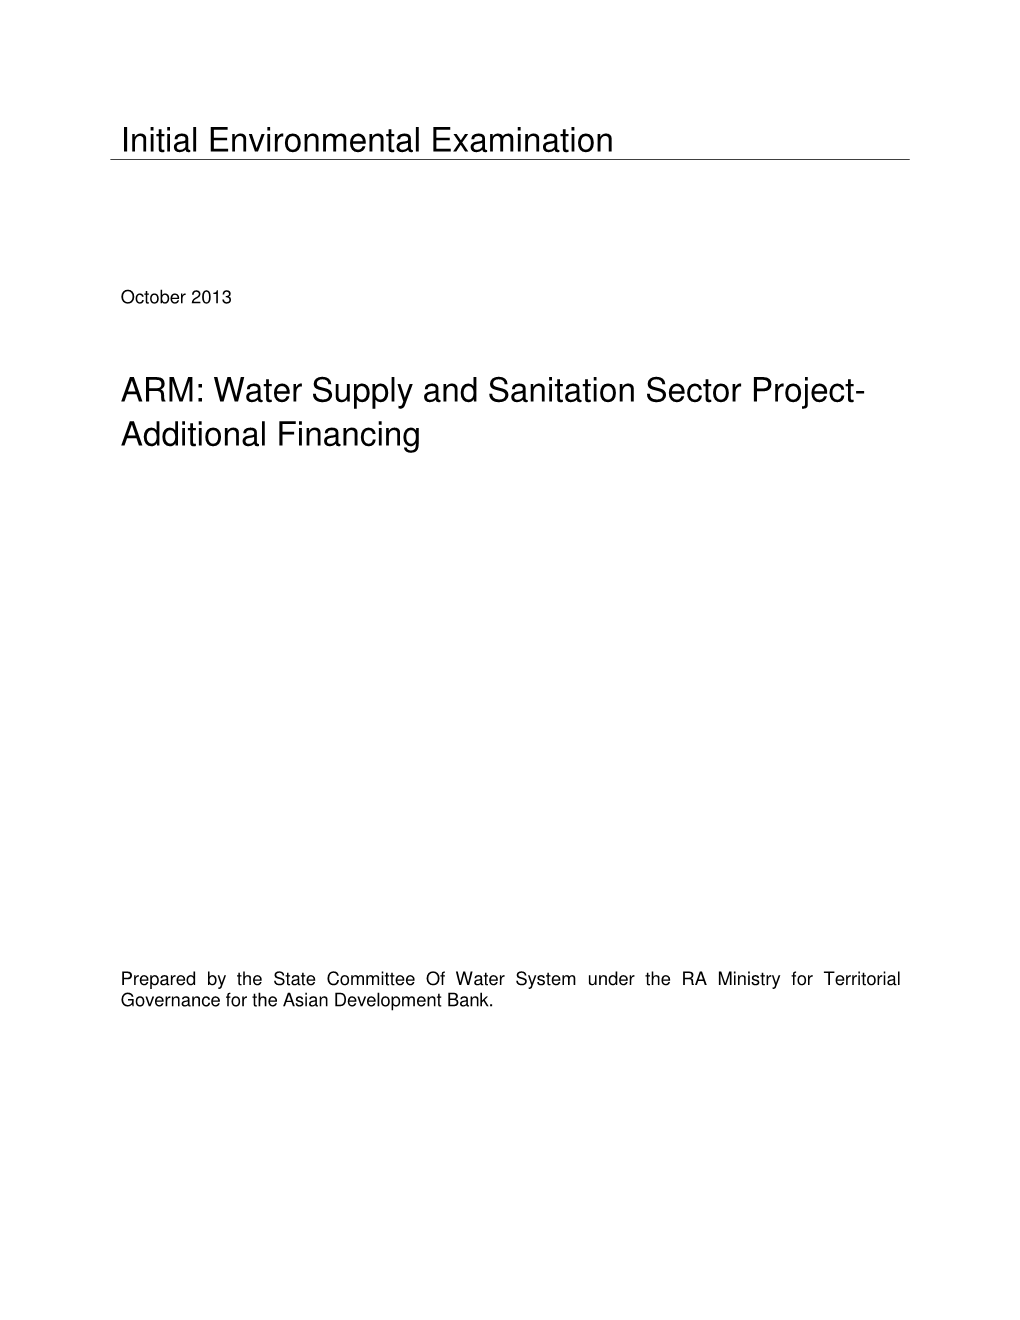 Water Supply and Sanitation Sector Project-Additional Financing